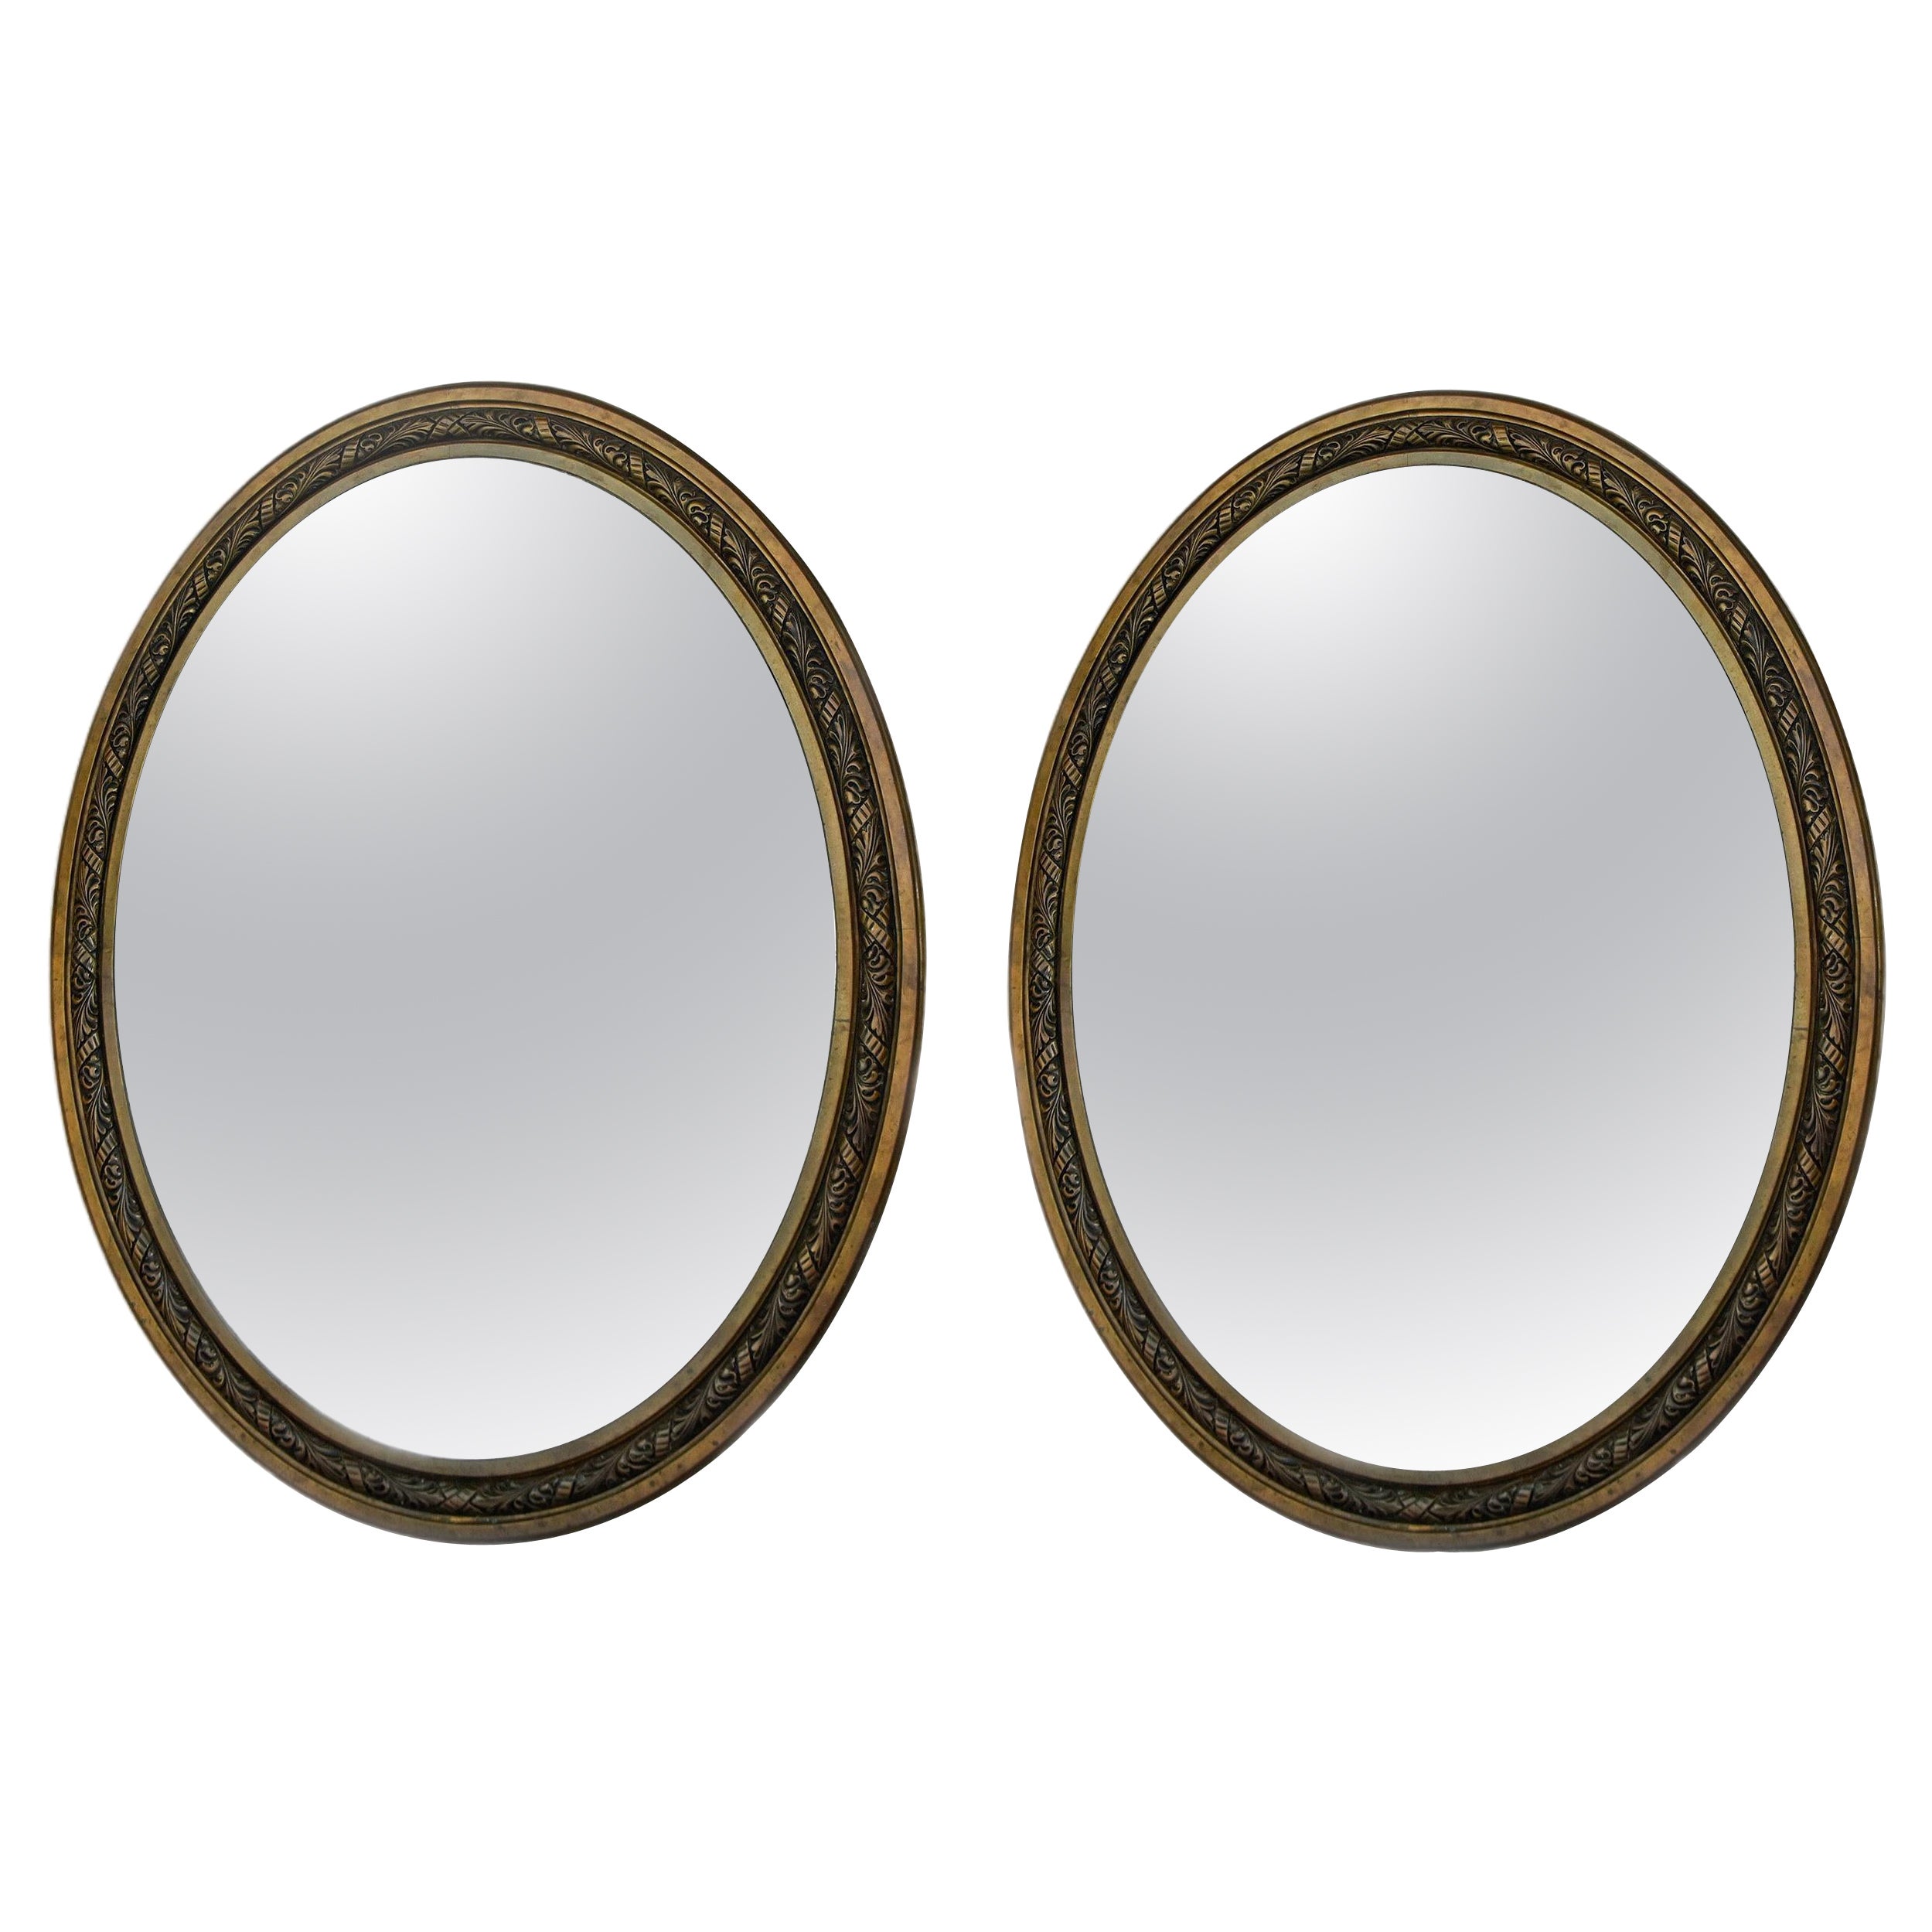 Pair Large Early 20th C French Bronze Oval Frame Bevel Edge Mirrors  For Sale